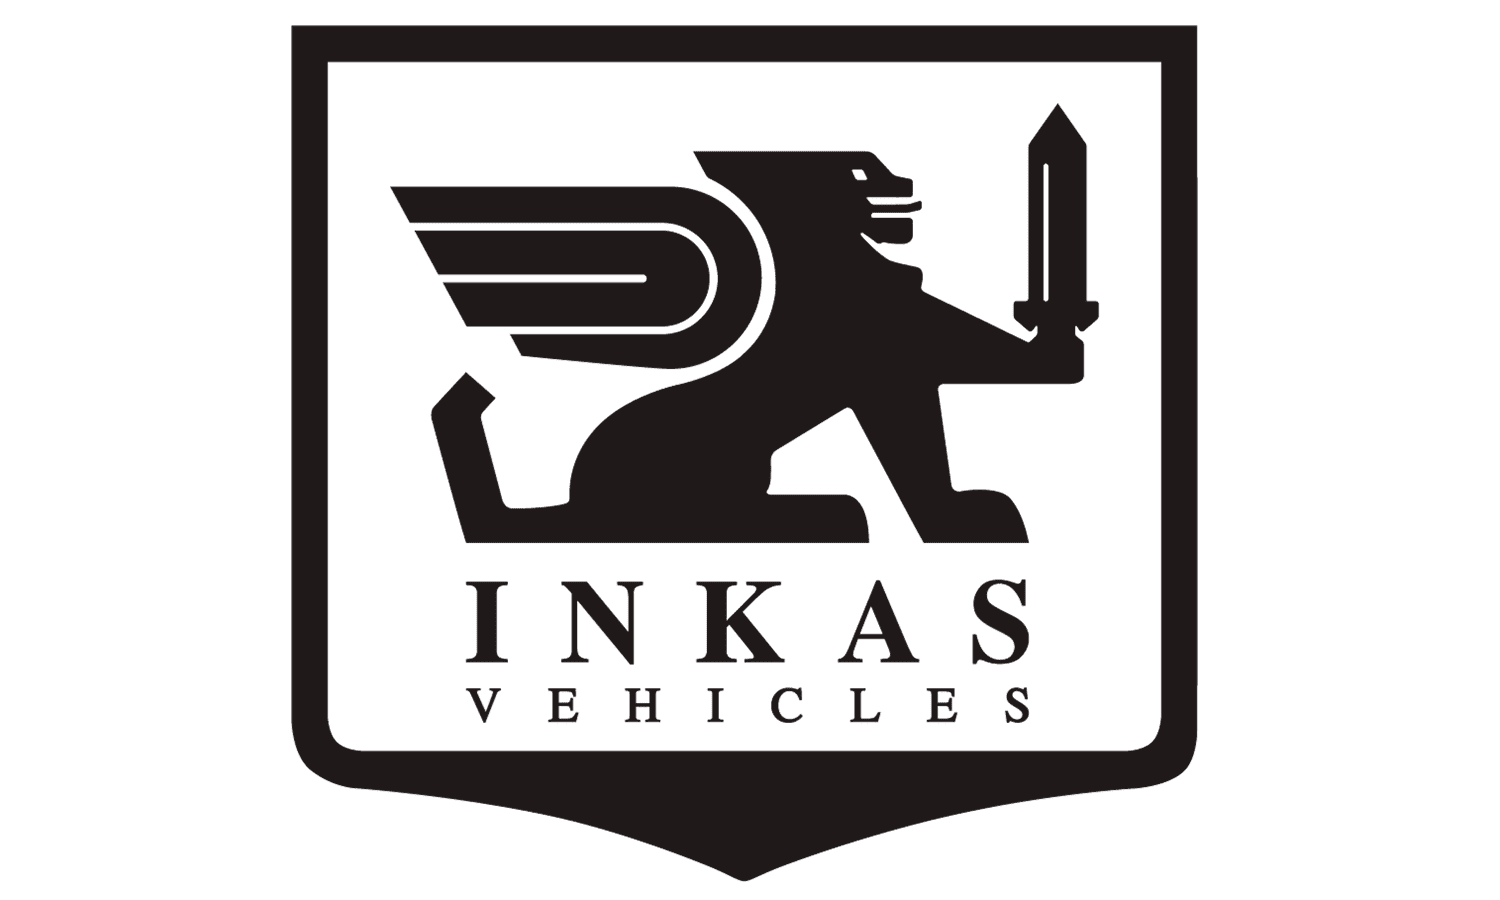 Car logos with lions